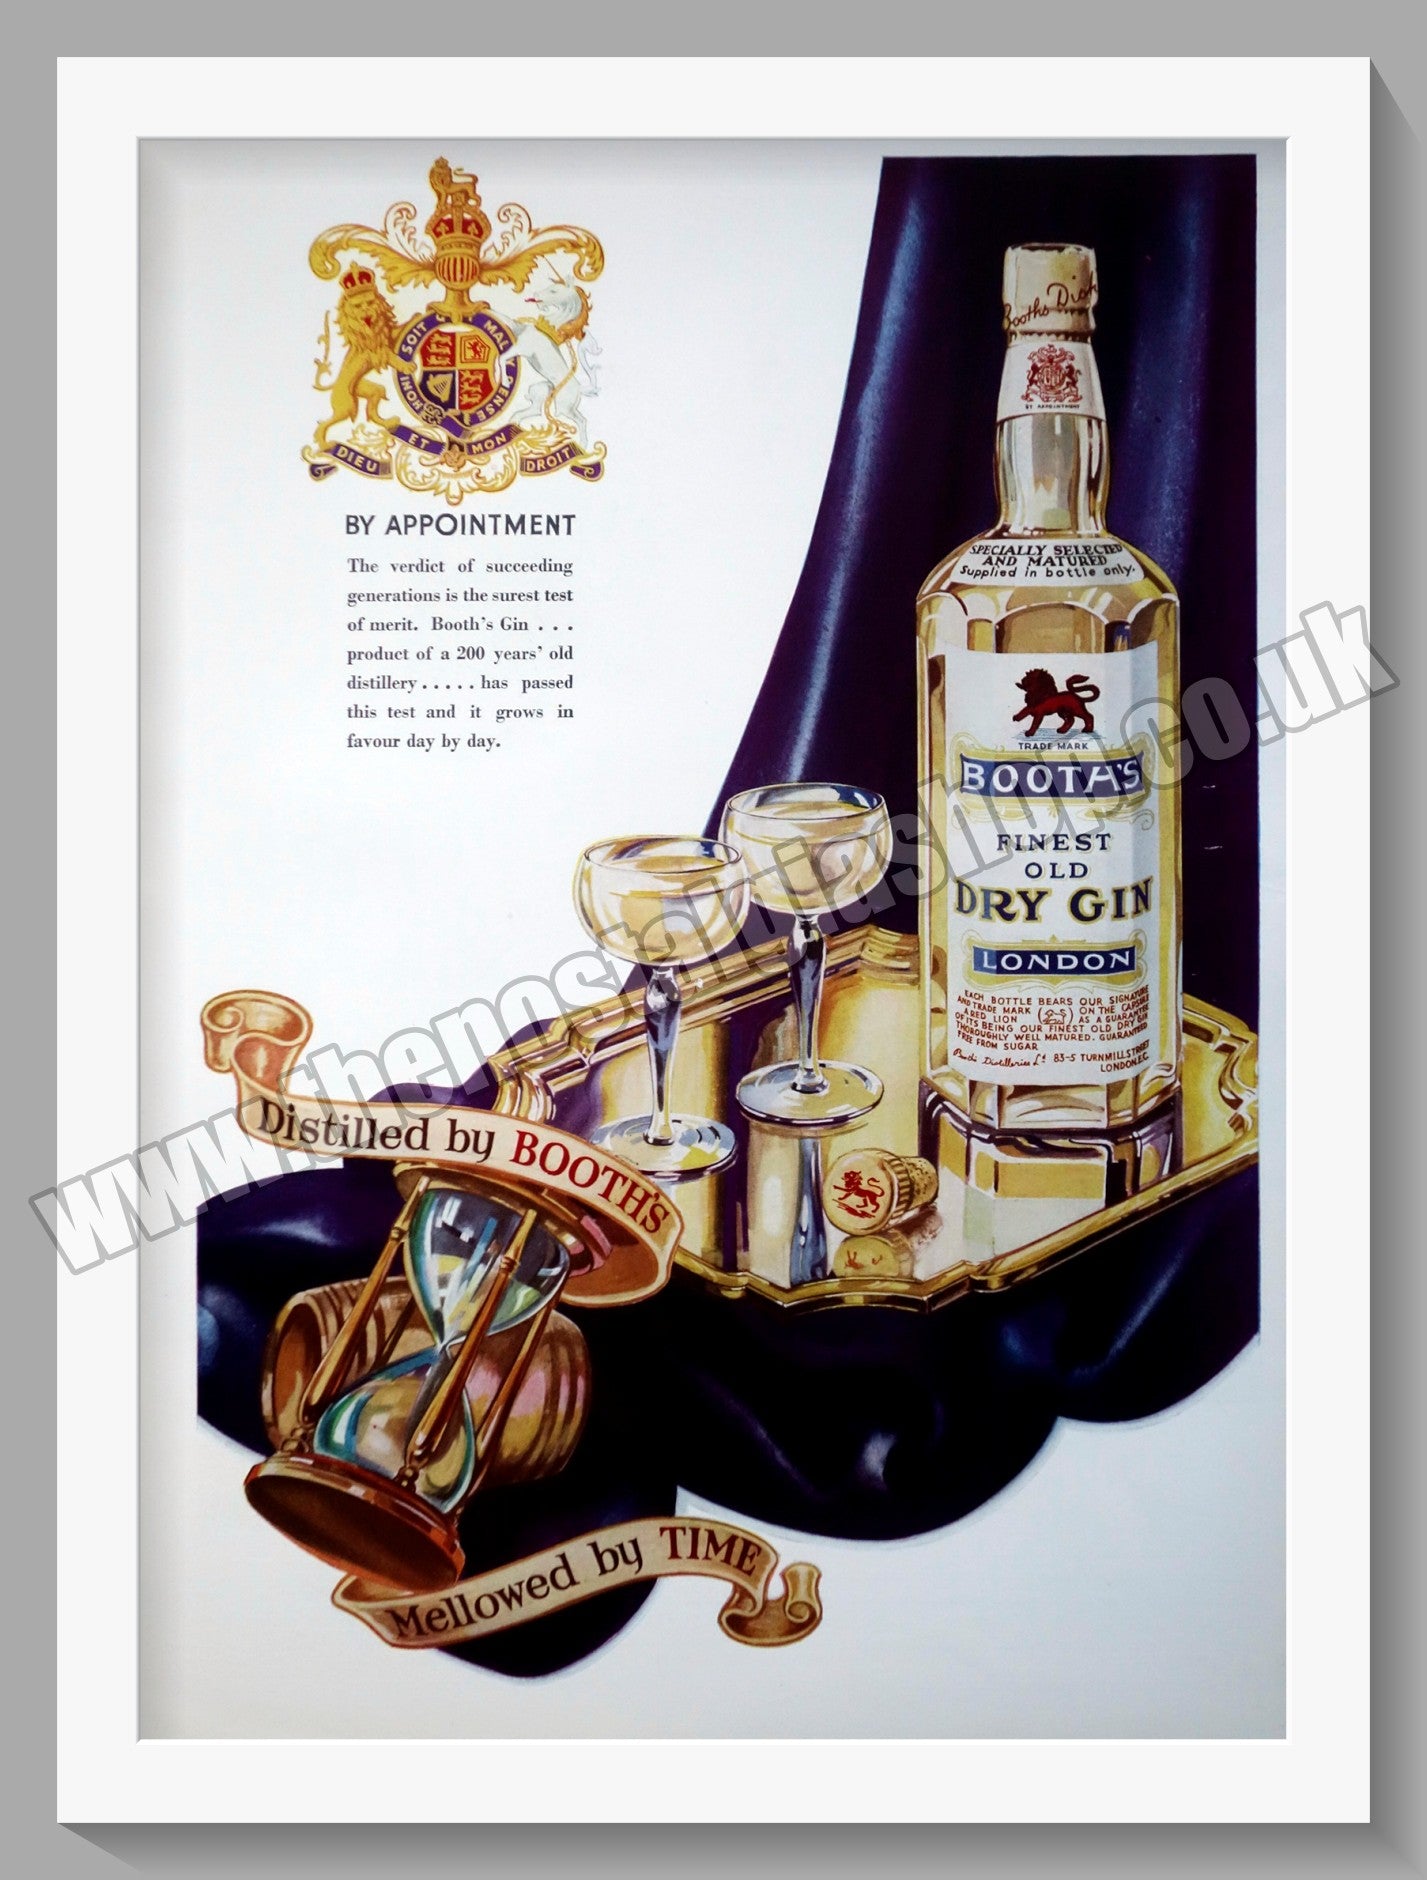 Booth's London Dry Gin. Original Advert 1935 (ref AD300296)